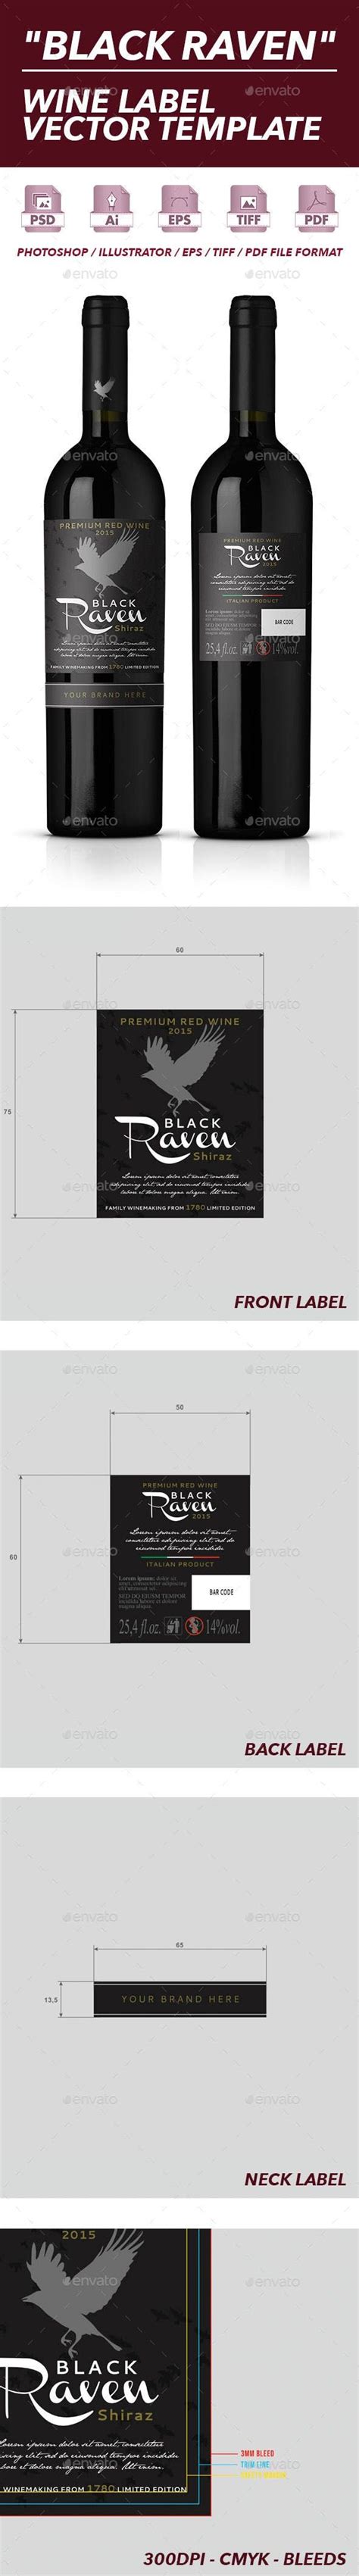 Label { private bool mgrowing; Red Wine Label Vector Template by ShinyPixel